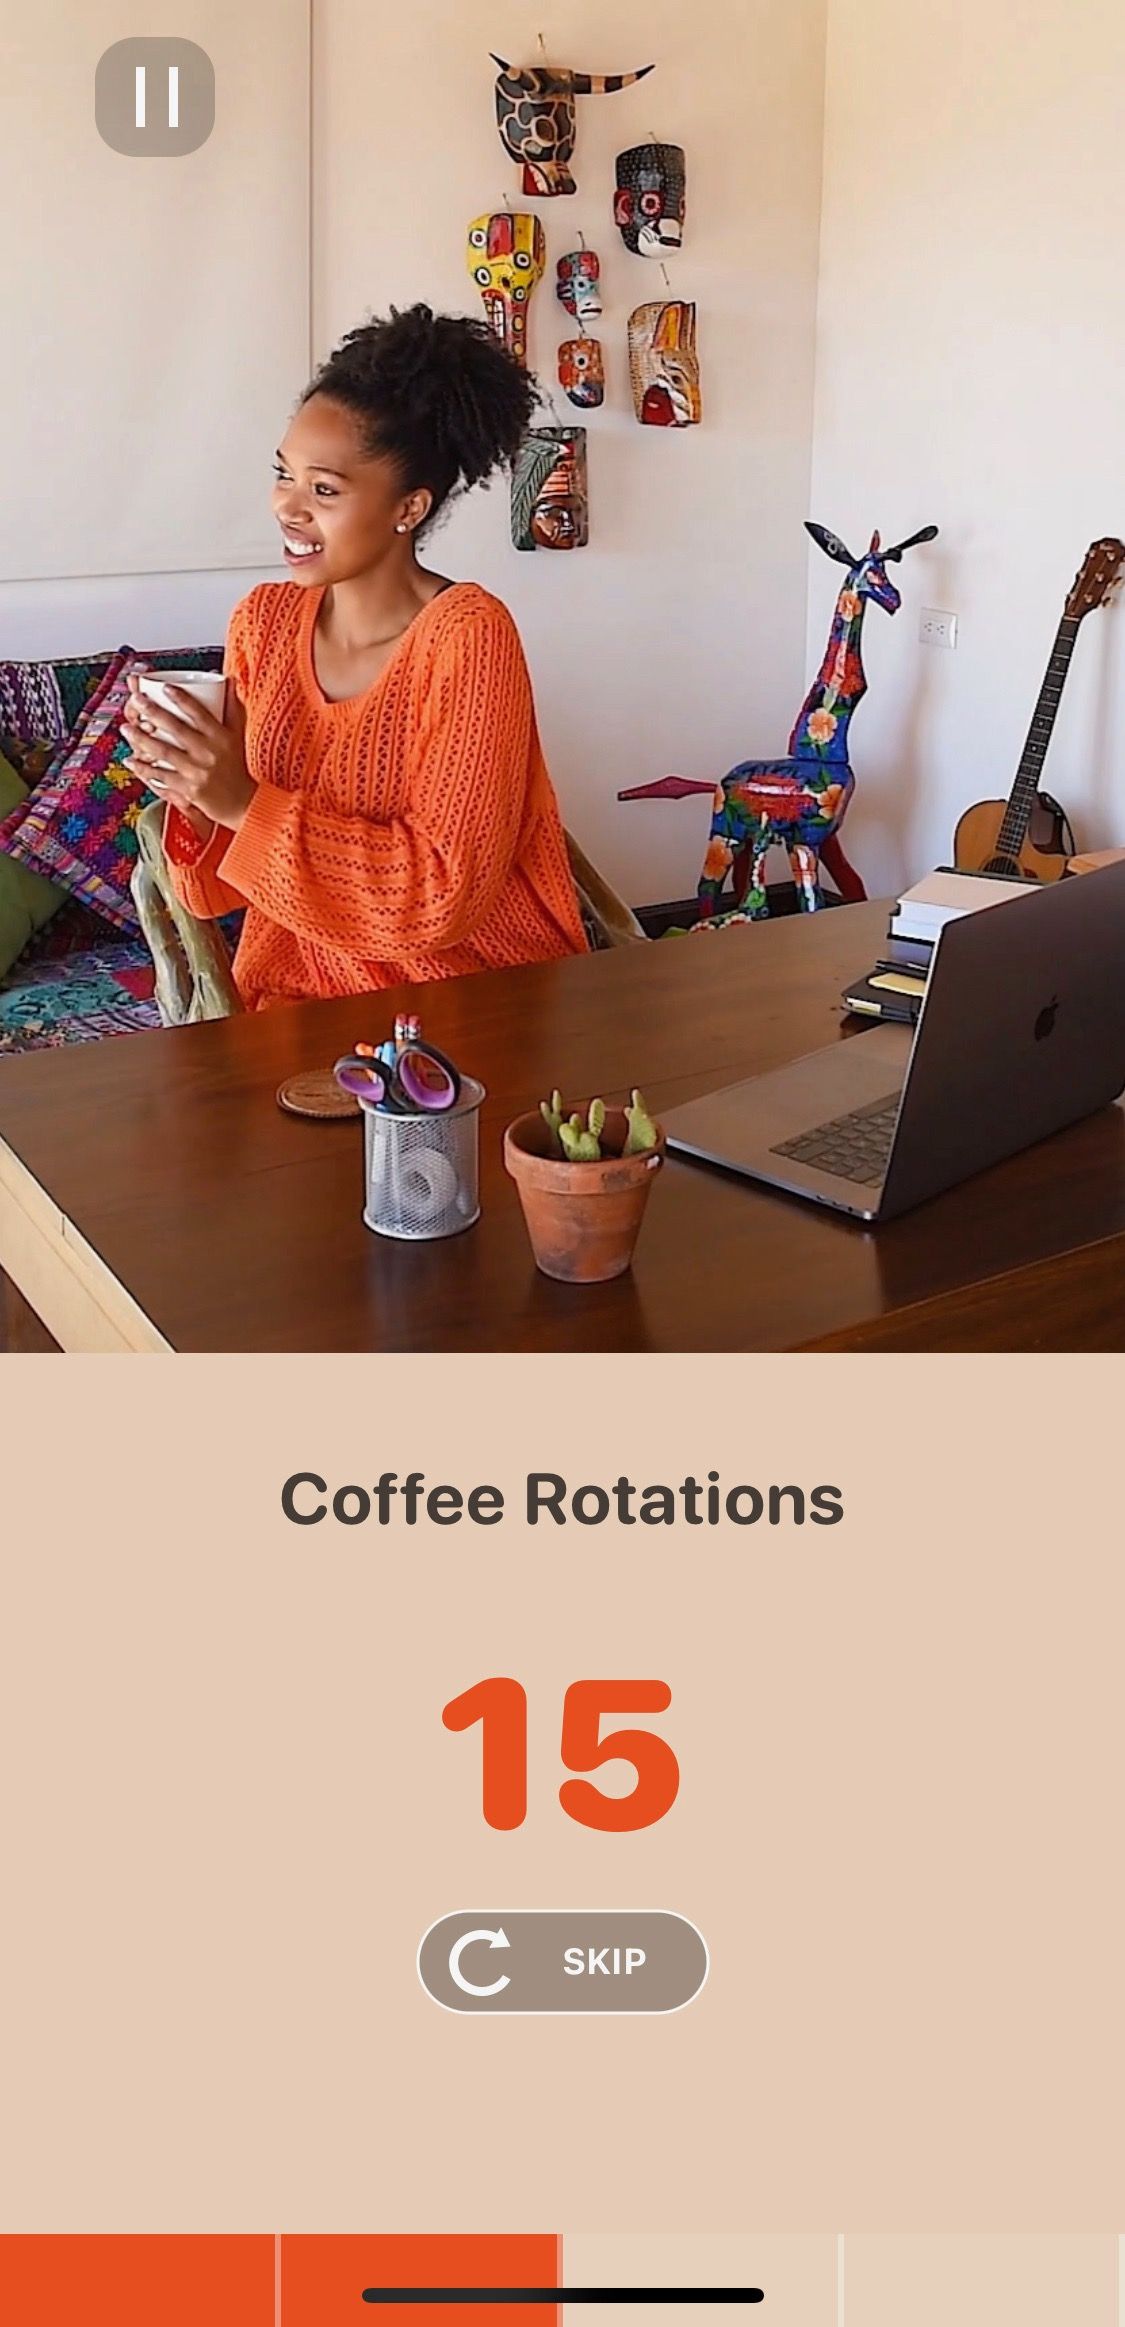 Screenshot of Wakeout app showing the coffee rotations exercise screen